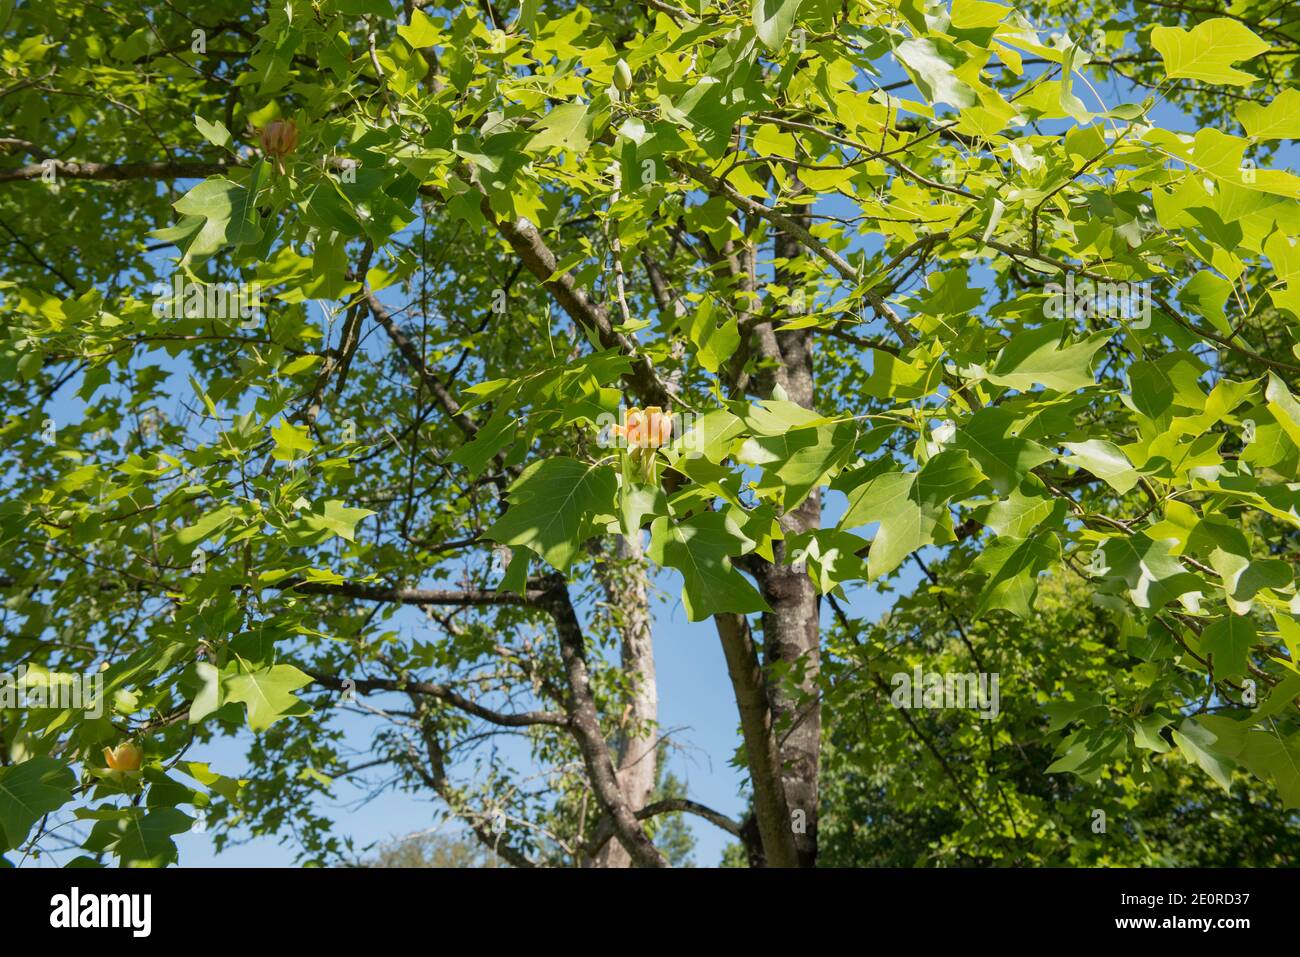 Summer Foliage and Flowers on a Deciduous Chinese Tulip Tree (Liriodendron chinense) Growing in a Garden in Rural Devon, England, UK Stock Photo